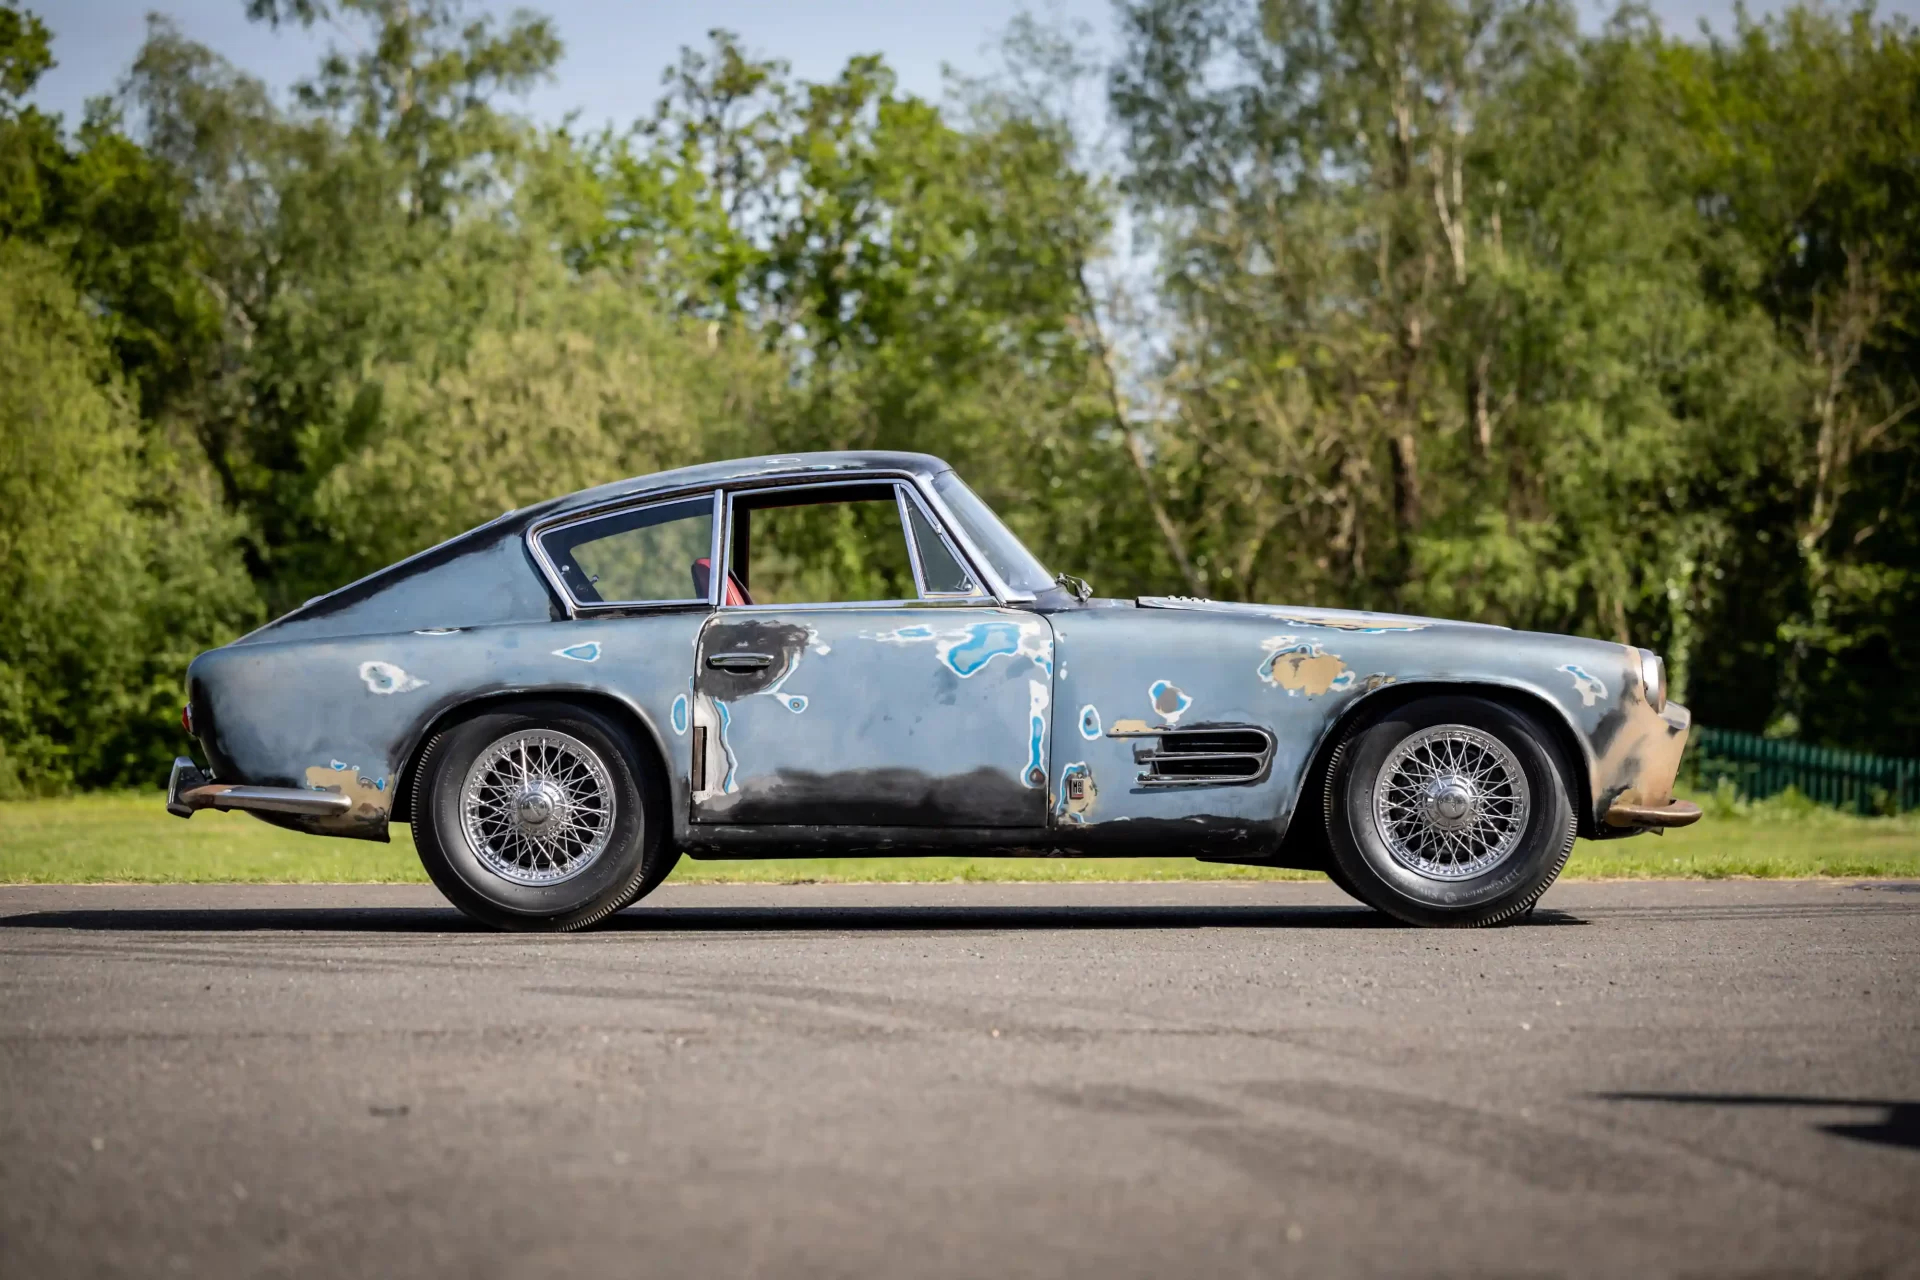 A classic 1955 Jaguar XK 140 SE Coupé, damaged in a 1957 accident and never restored, is set to auction for £350,000. Ideal restoration project for car enthusiasts.